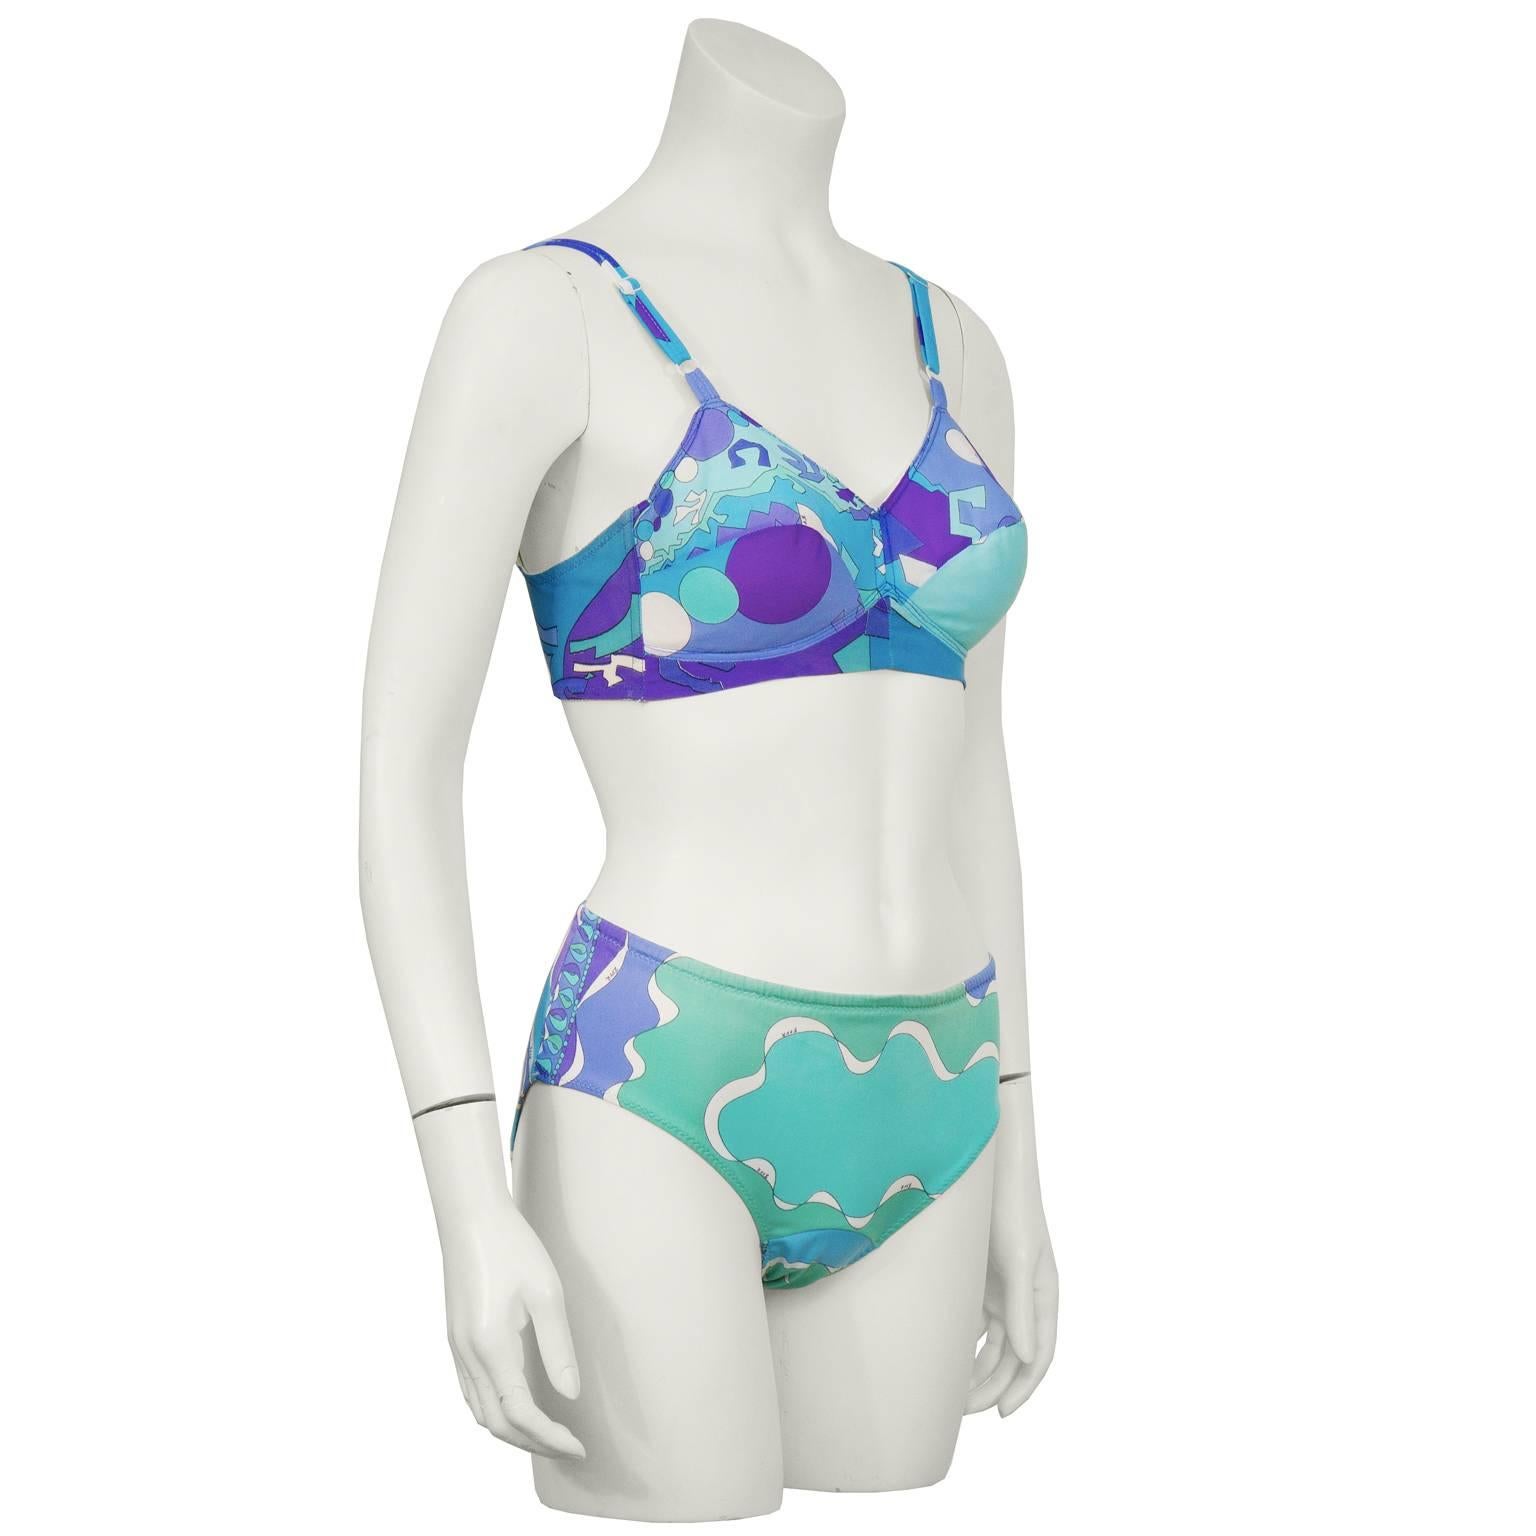 1970's Emilio Pucci for Formfit Rogers nylon bra and underwear set. The brassiere features a blue/green/purple geometric print with adjustable straps, padded cups and lycra mesh siding. Closes with a 2 hook adjustable closure. The full coverage